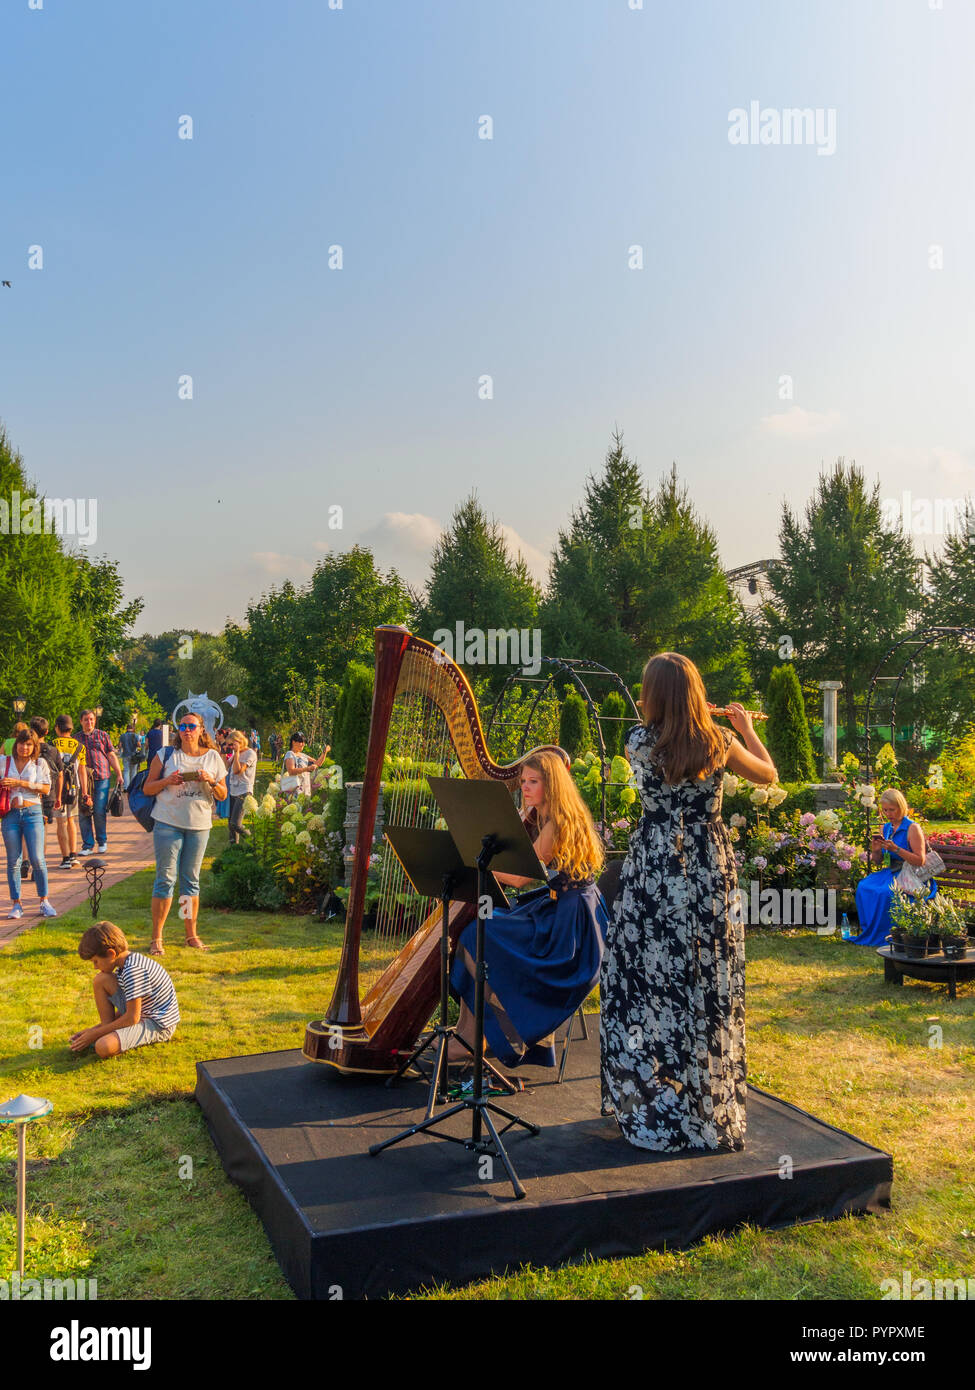 MOSCOW, RUSSIA - AUGUST 31, 2018:  Landscape architecture  and garden festival at Tsaritsyno park. Stock Photo